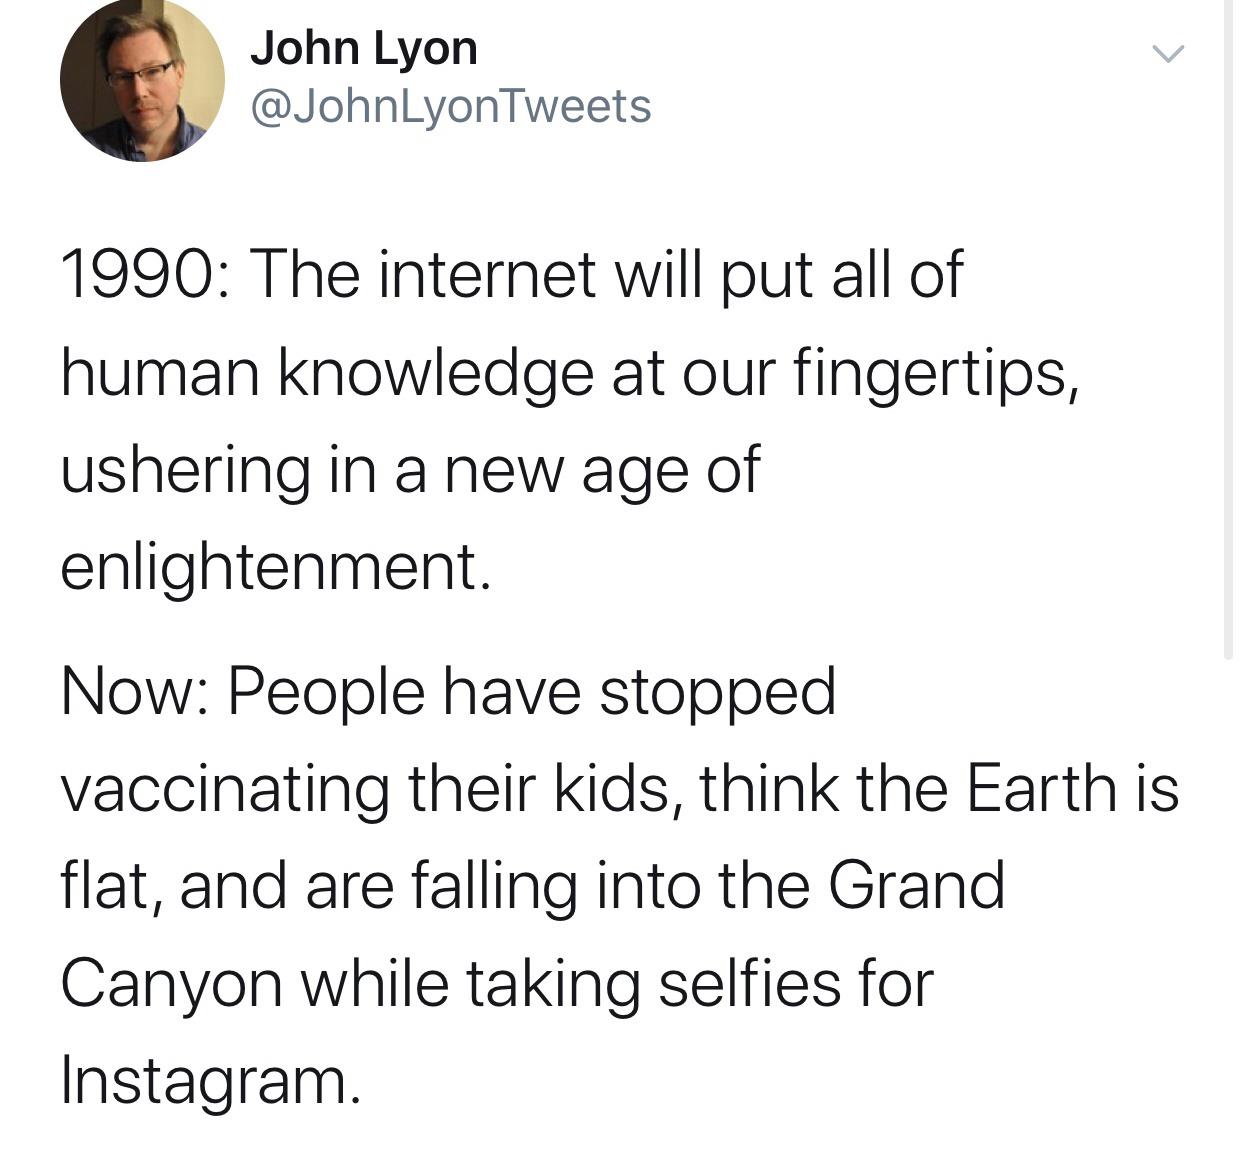 pg&e outage meme - John Lyon Tweets 1990 The internet will put all of human knowledge at our fingertips, ushering in a new age of enlightenment Now People have stopped vaccinating their kids, think the Earth is flat, and are falling into the Grand Canyon 